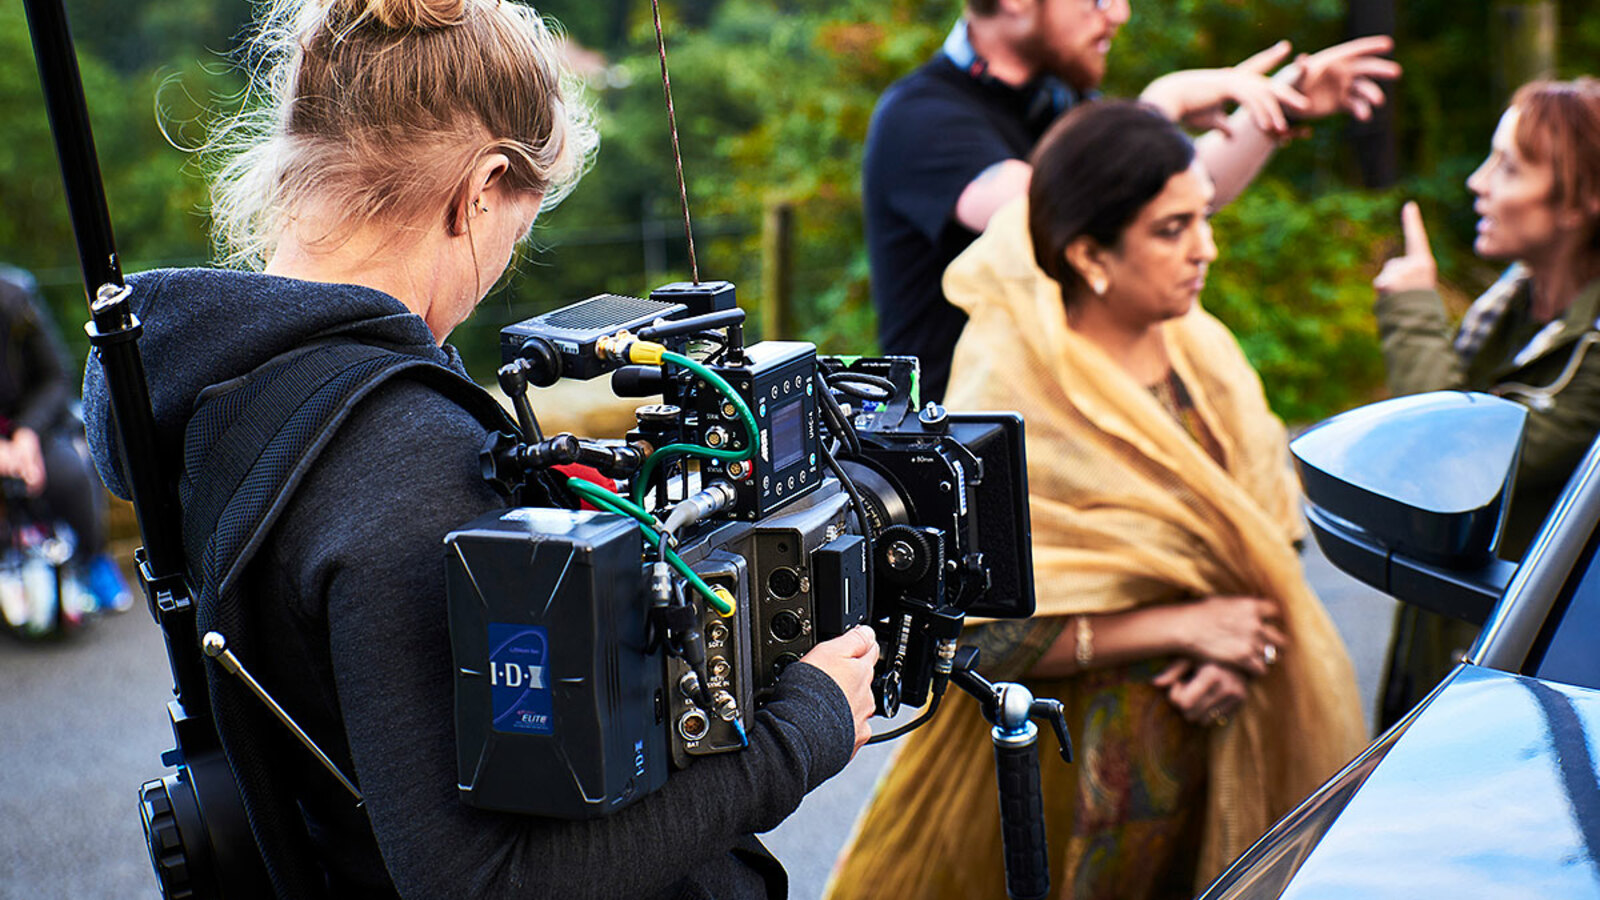 A camera operator is pictured from behind, holding a camera towards two people that are being directed for a shot.